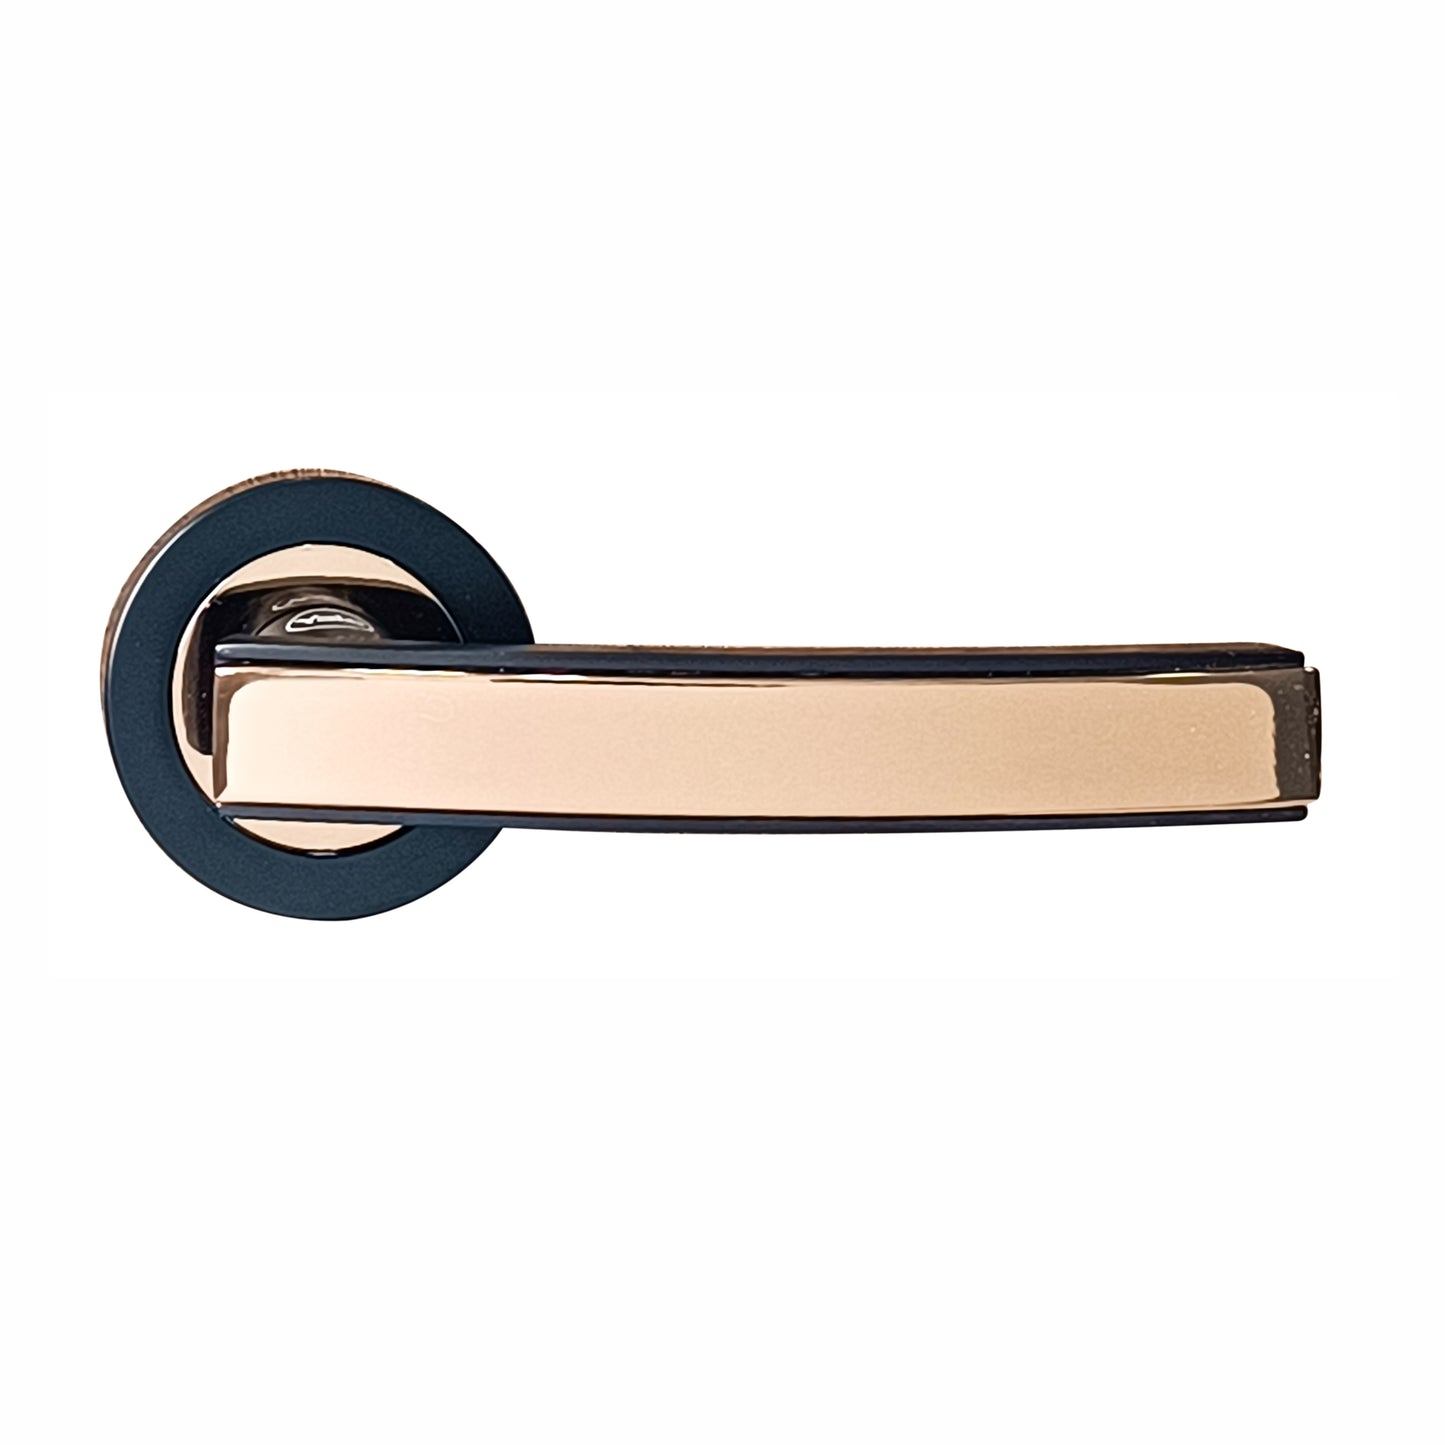 SM-04-01-03 Yale SM series Mortise Lock Comboset, Cylinder with Knob inside and keys Outside, Black and Rose Gold Dual Finish